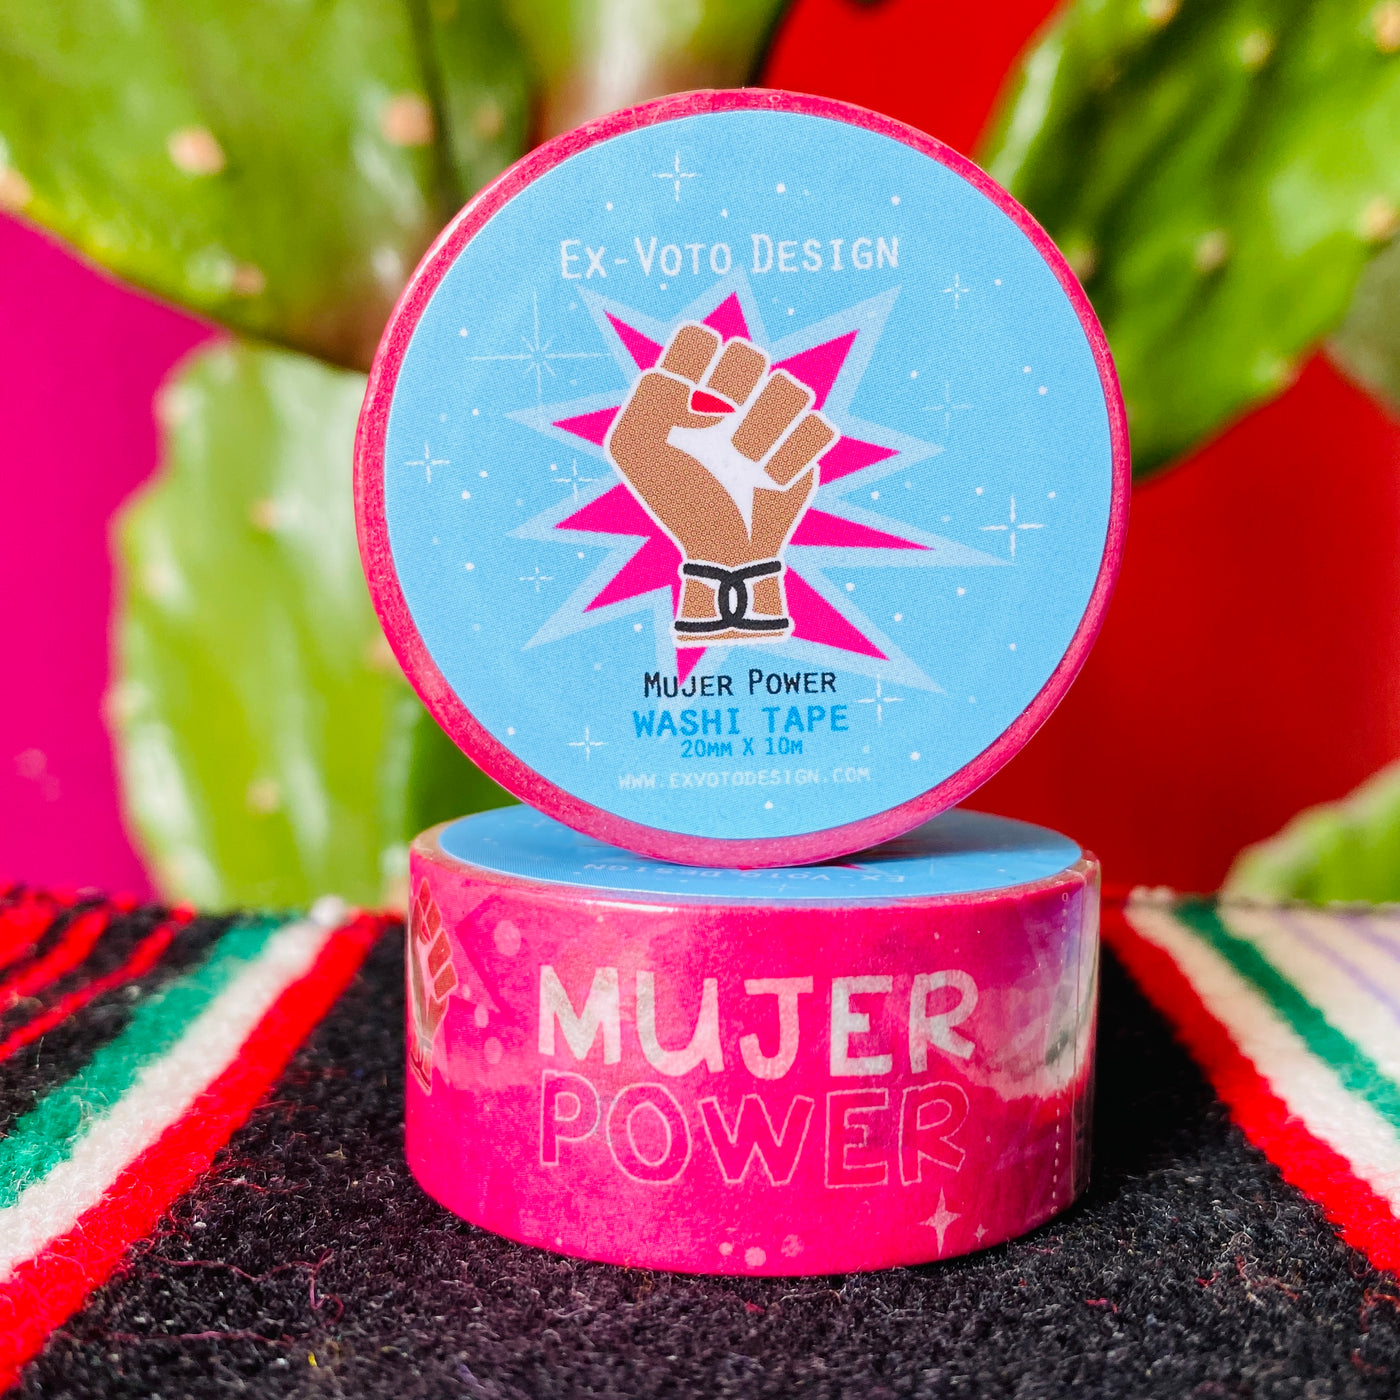 Close up of Mujer Power pink washi tape.